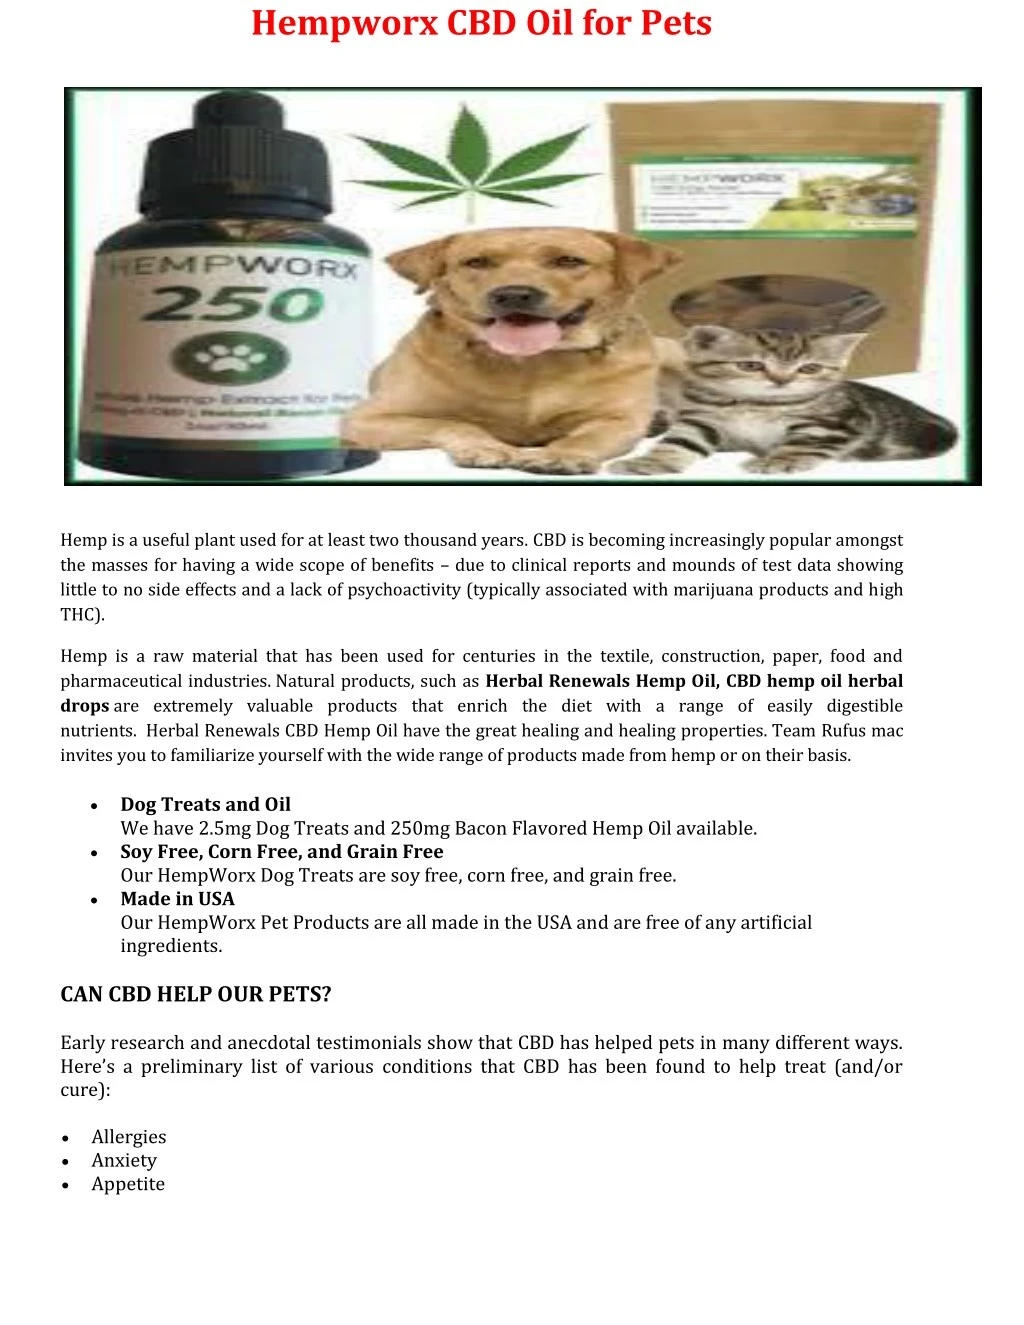 PPT - Hempworx CBD Oil for Pets PowerPoint Presentation, free download - ID:7978487